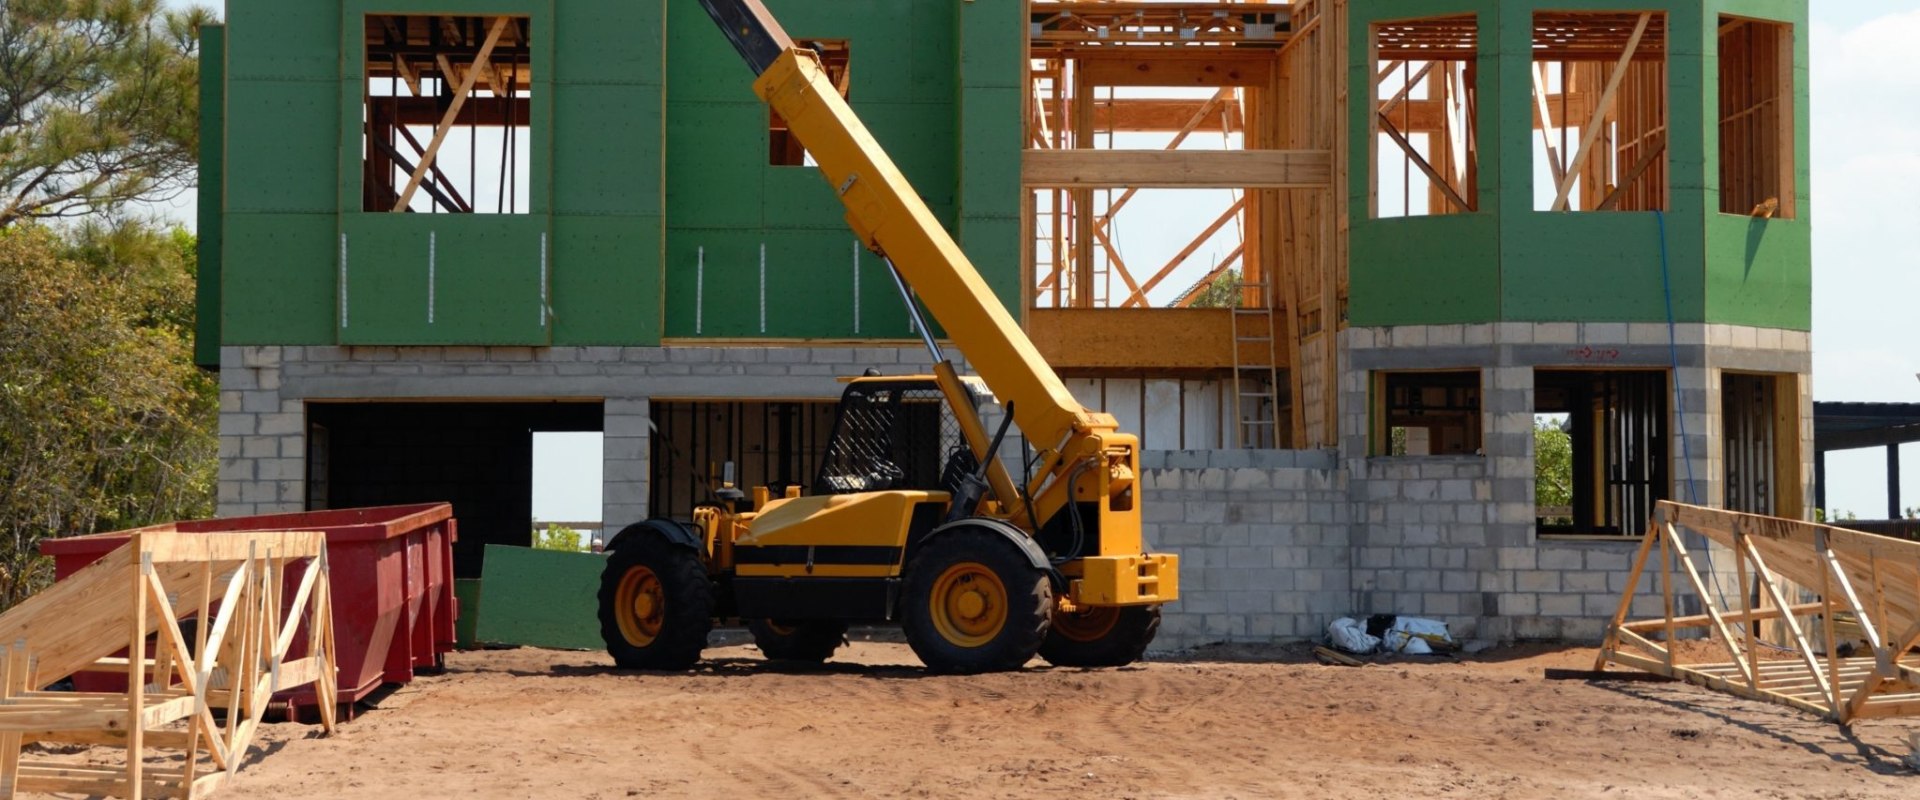 The Advantages of Modular Construction Over Traditional Construction